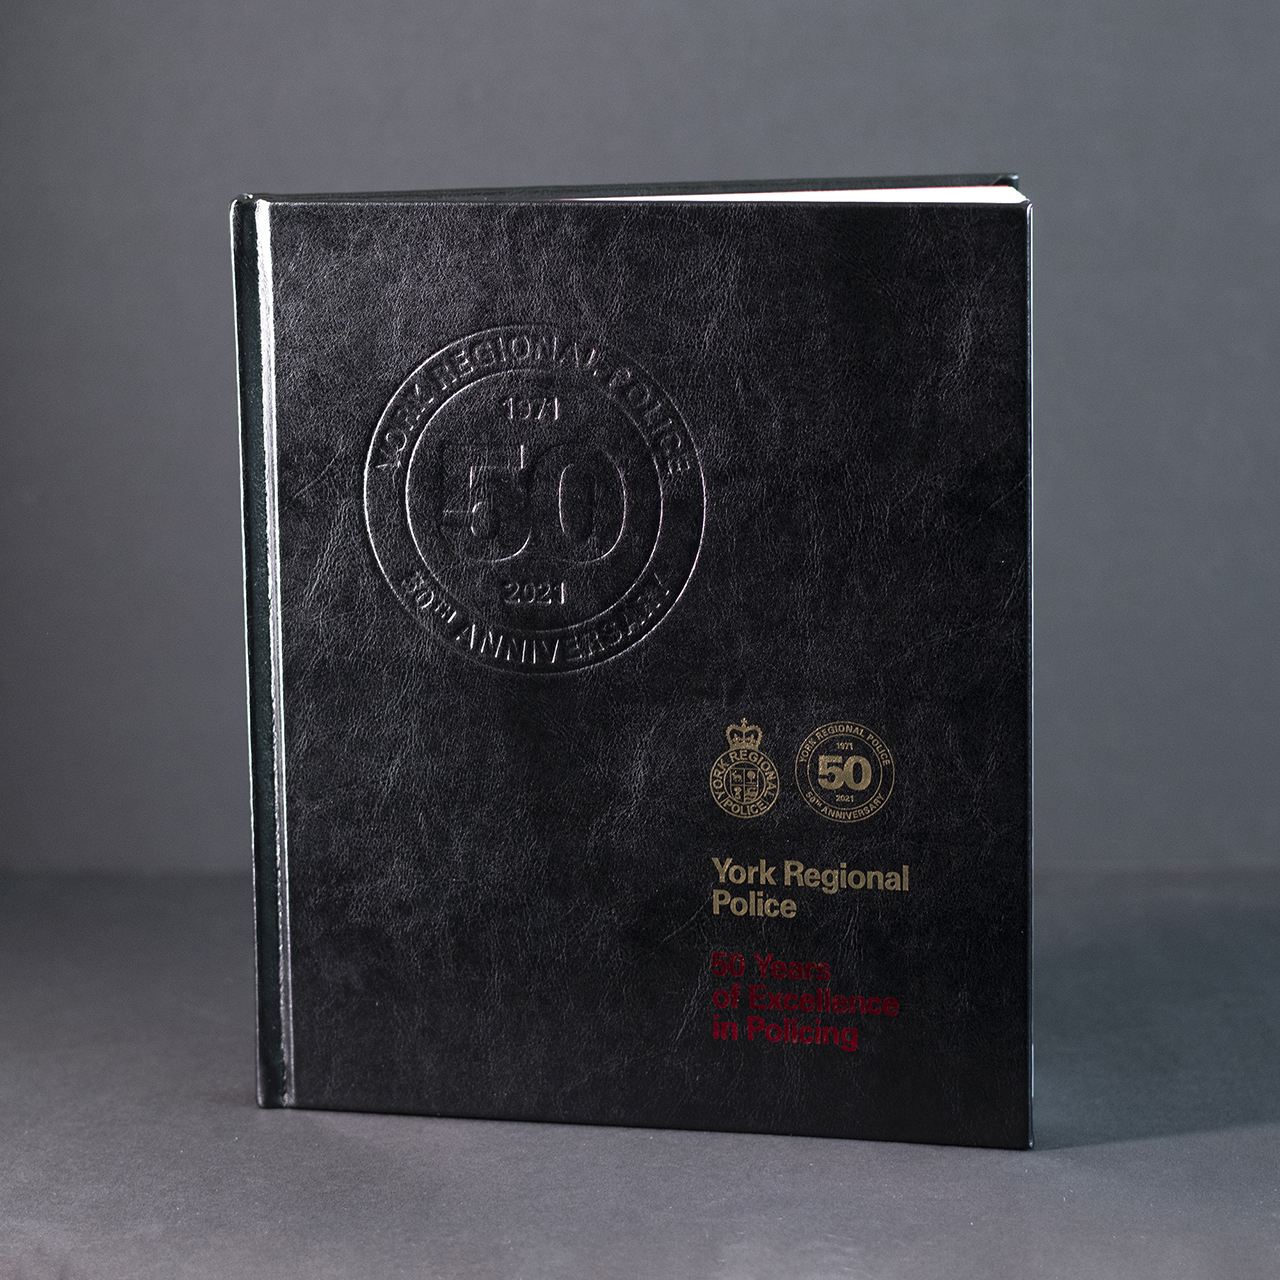 A black, leather bound book with gold and red foil text